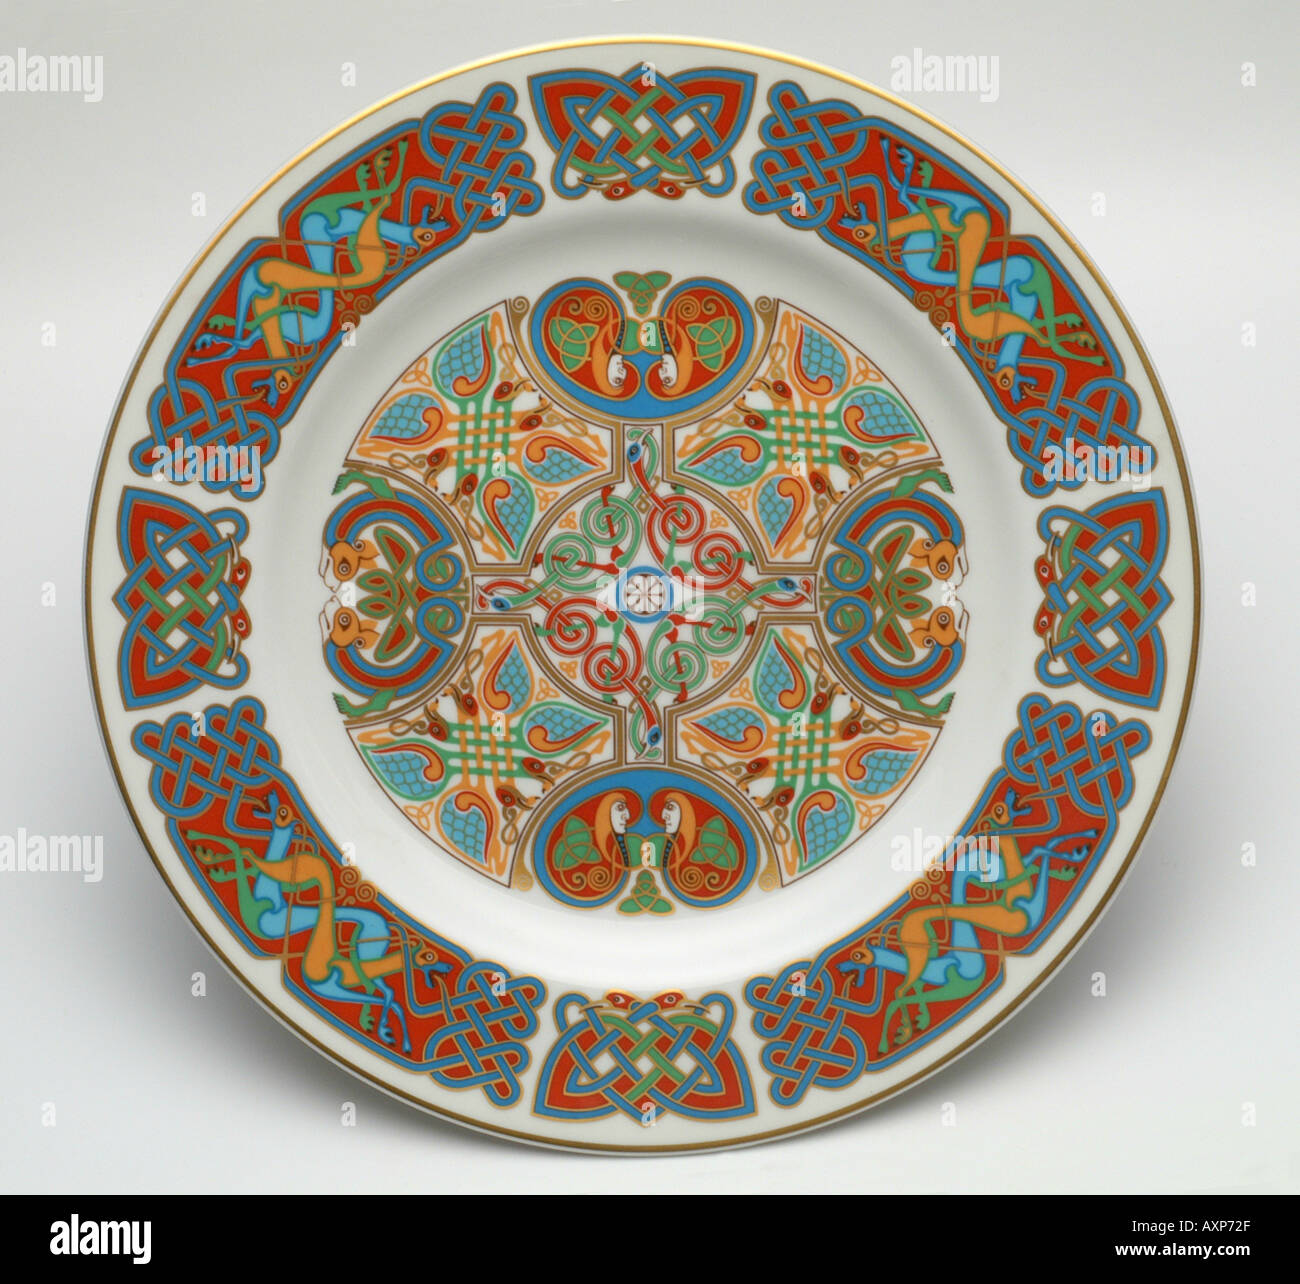 lindisfarne Spode china plates with Celtic designs inspired by the Christian Gospels Stock Photo